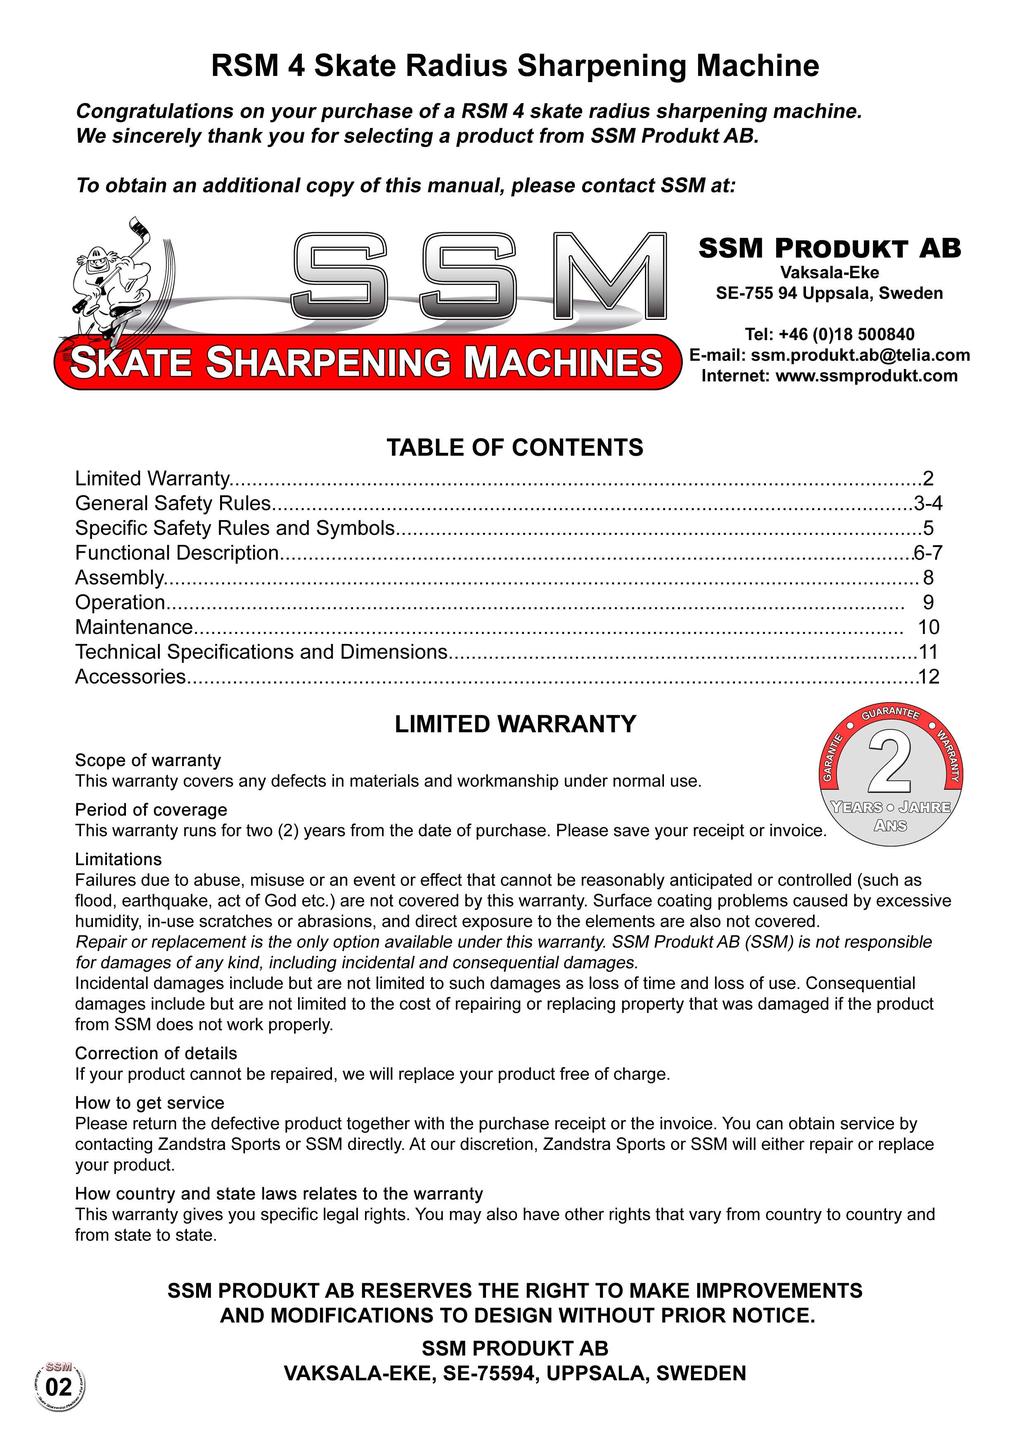 RSM 4 Skate Radius Sharpening Machine Congratulations on your purchase of a RSM 4 skate radius sharpening machine. We sincerely thank you for selecting a product from SSM Produkt AB.